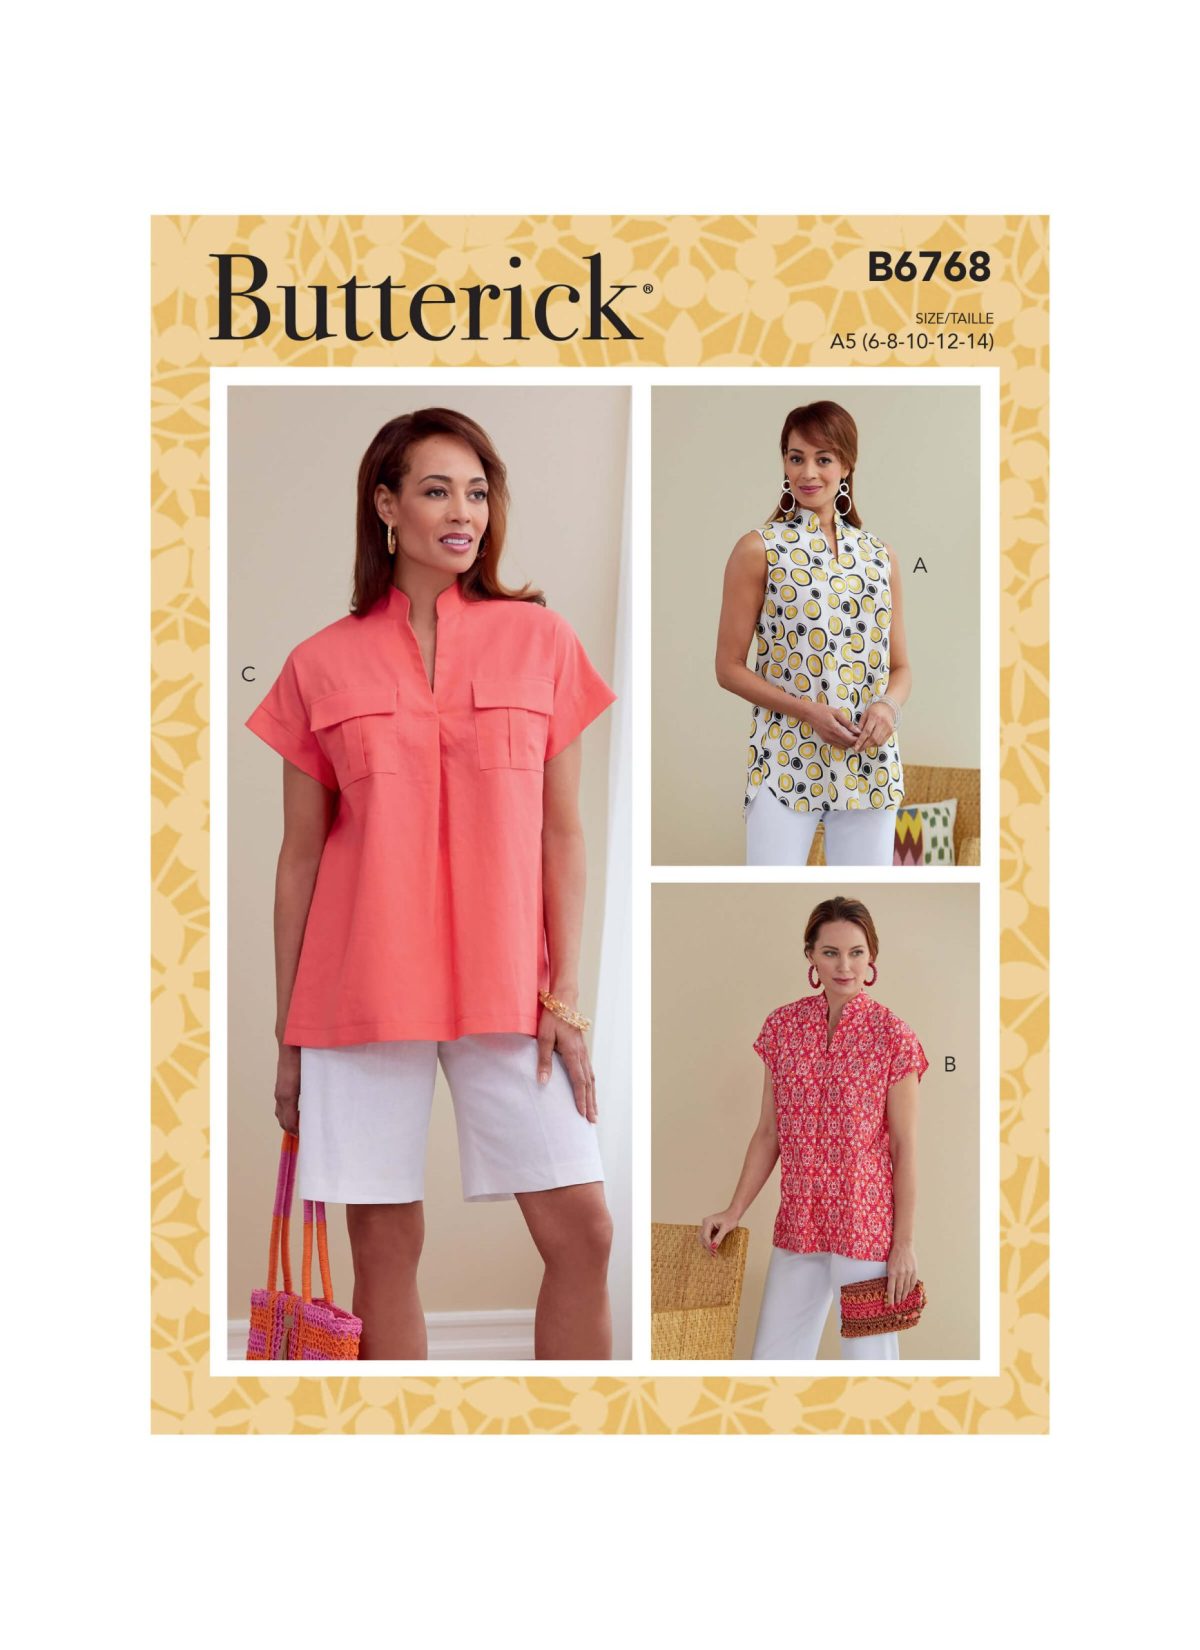 Butterick Sewing Pattern B6768 Misses' Top